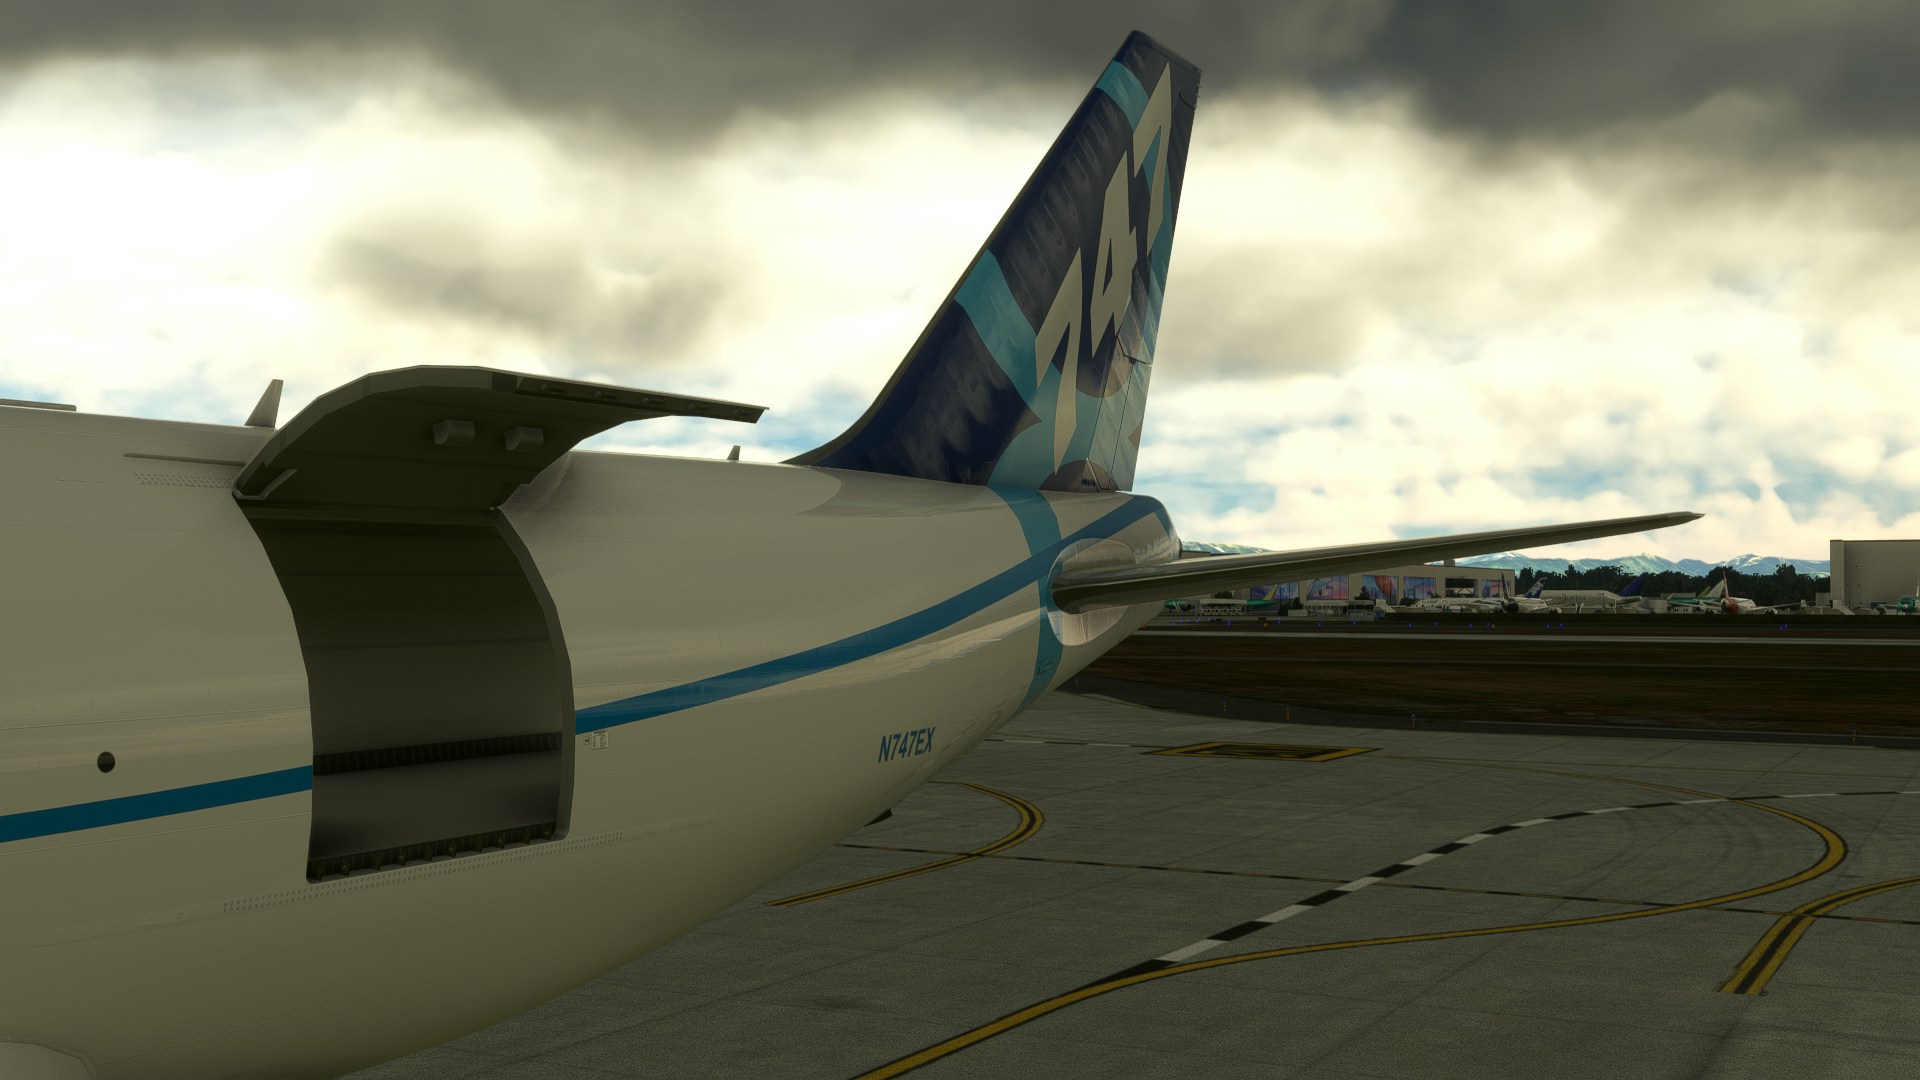 Horizon Sim Shares New Previews of the 747-8F Mod for MSFS